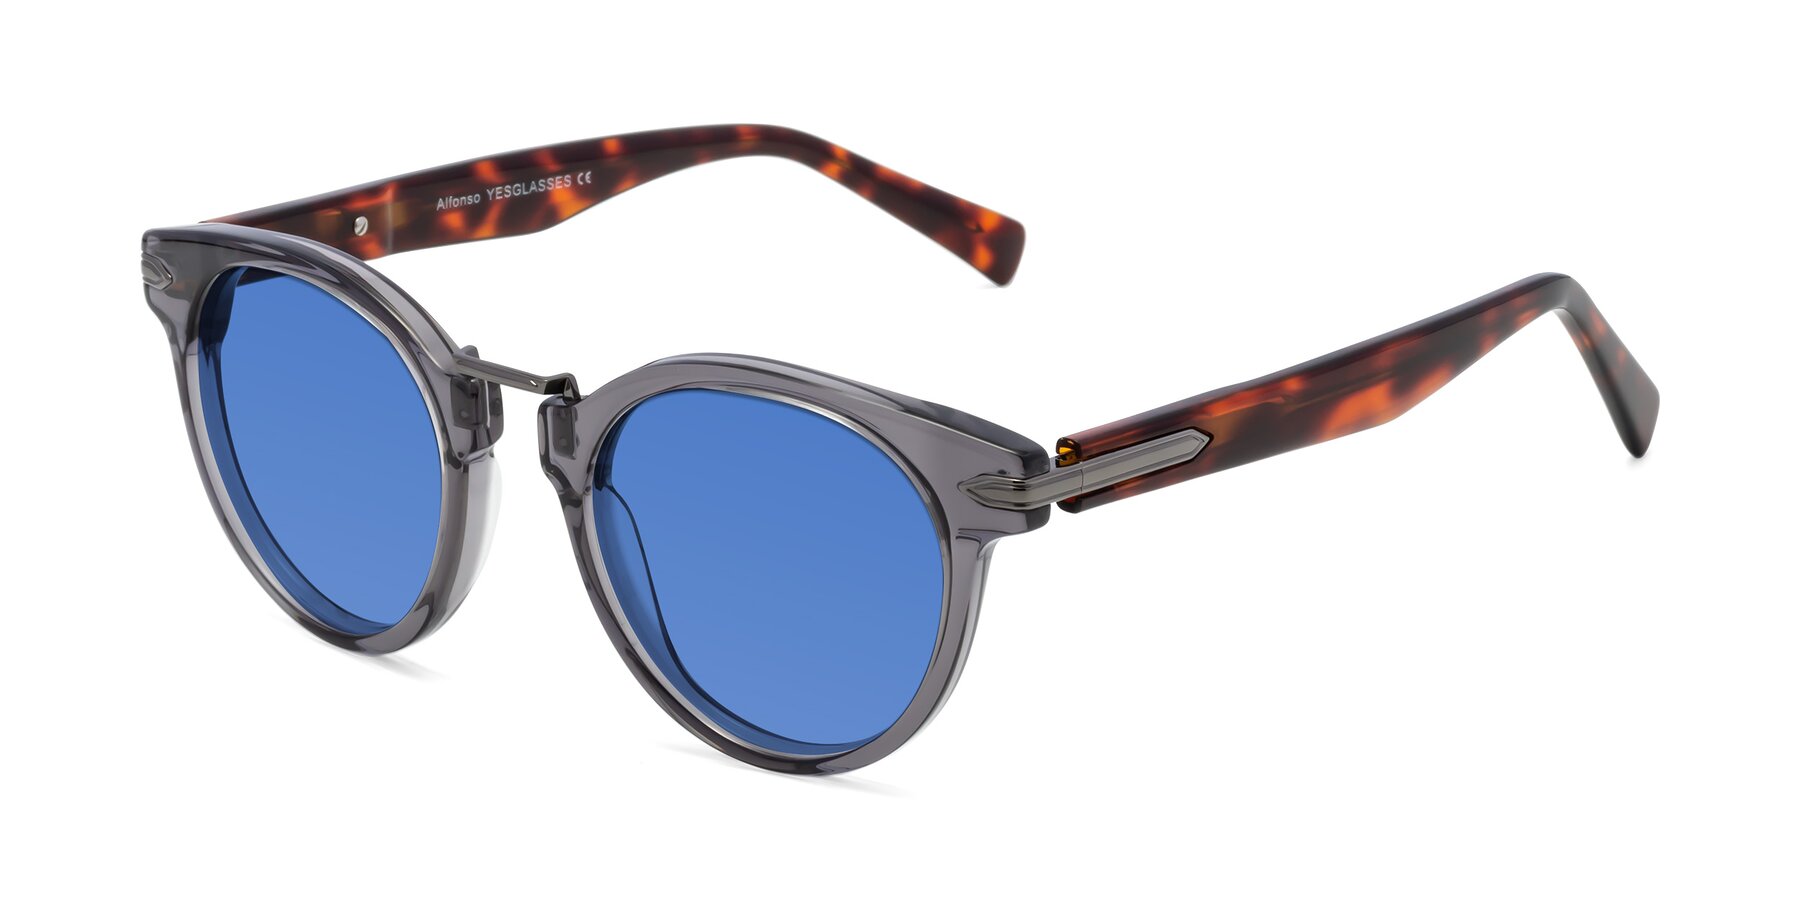 Angle of Alfonso in Gray /Tortoise with Blue Tinted Lenses